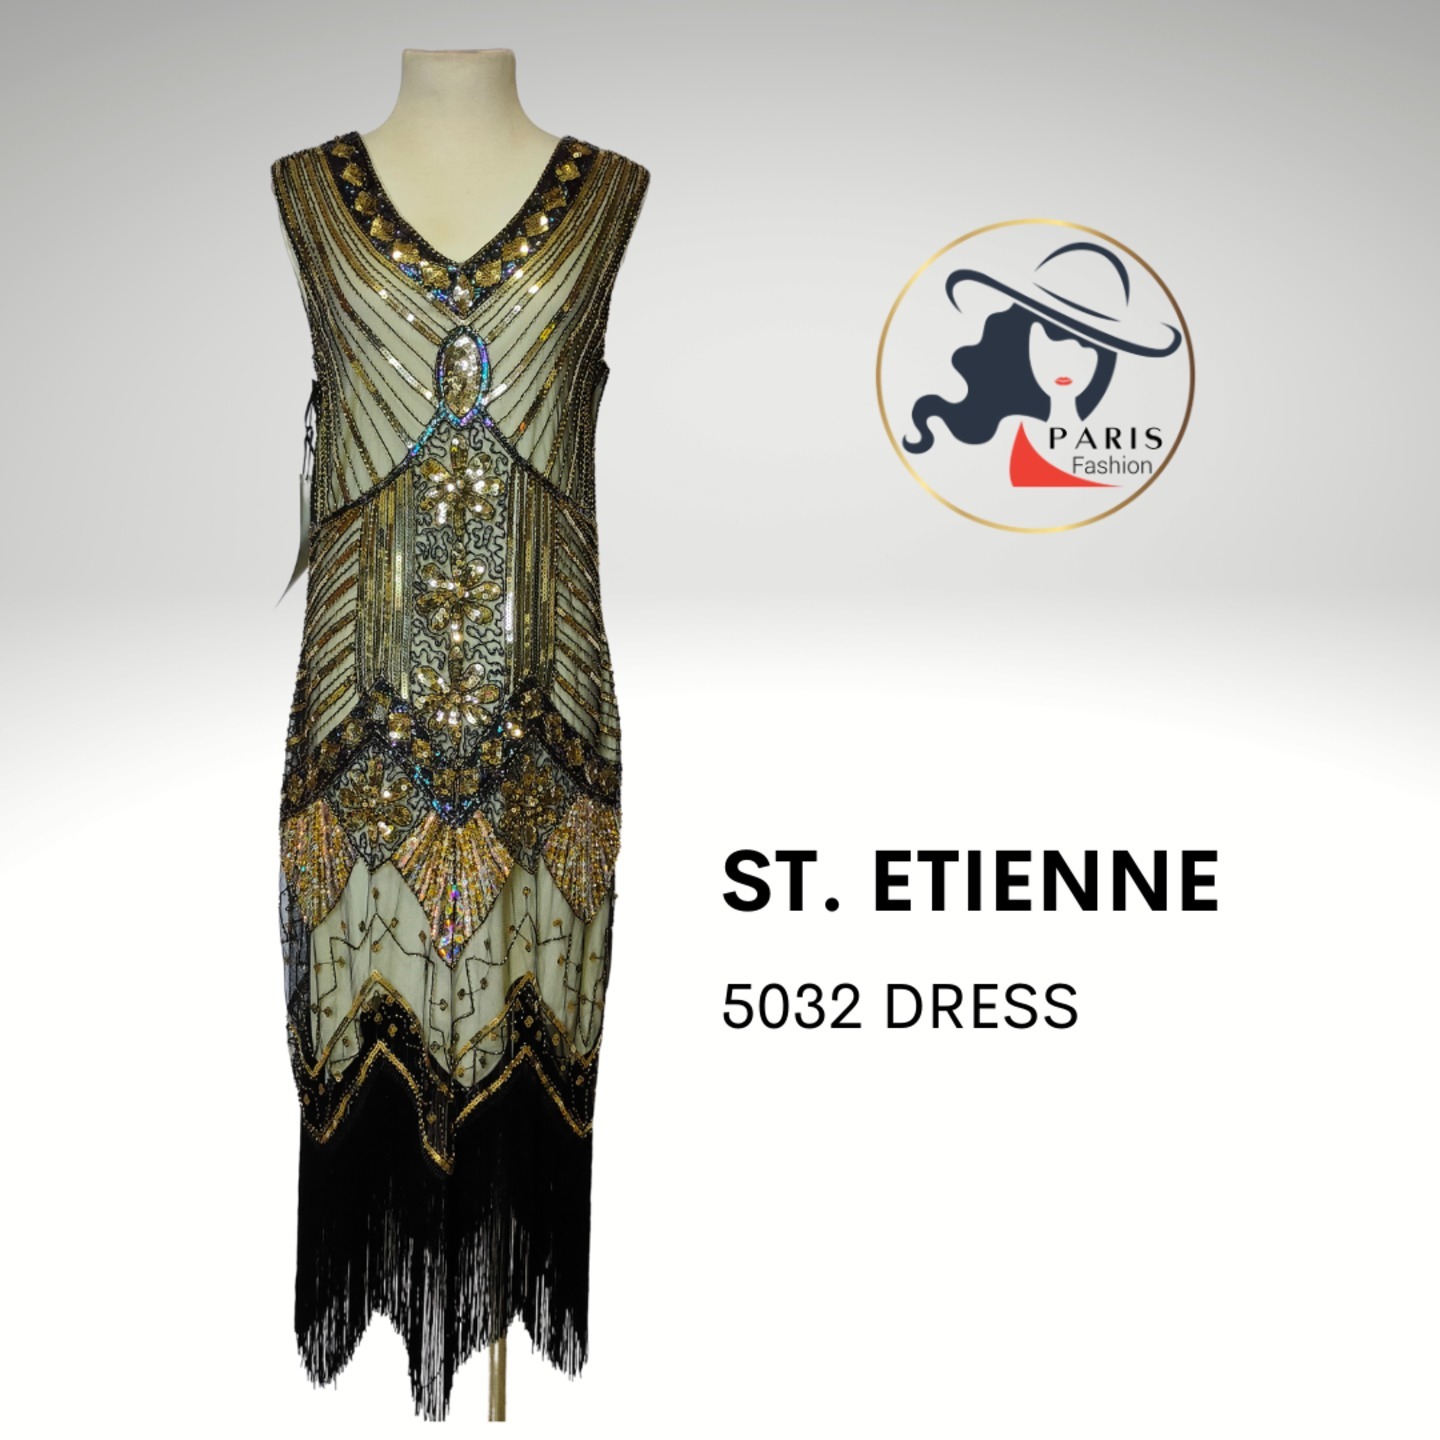 ST ETIENNE 5032 1920s INSPIRED SEQUINS FLAPPER DRESS WITH FRINGES